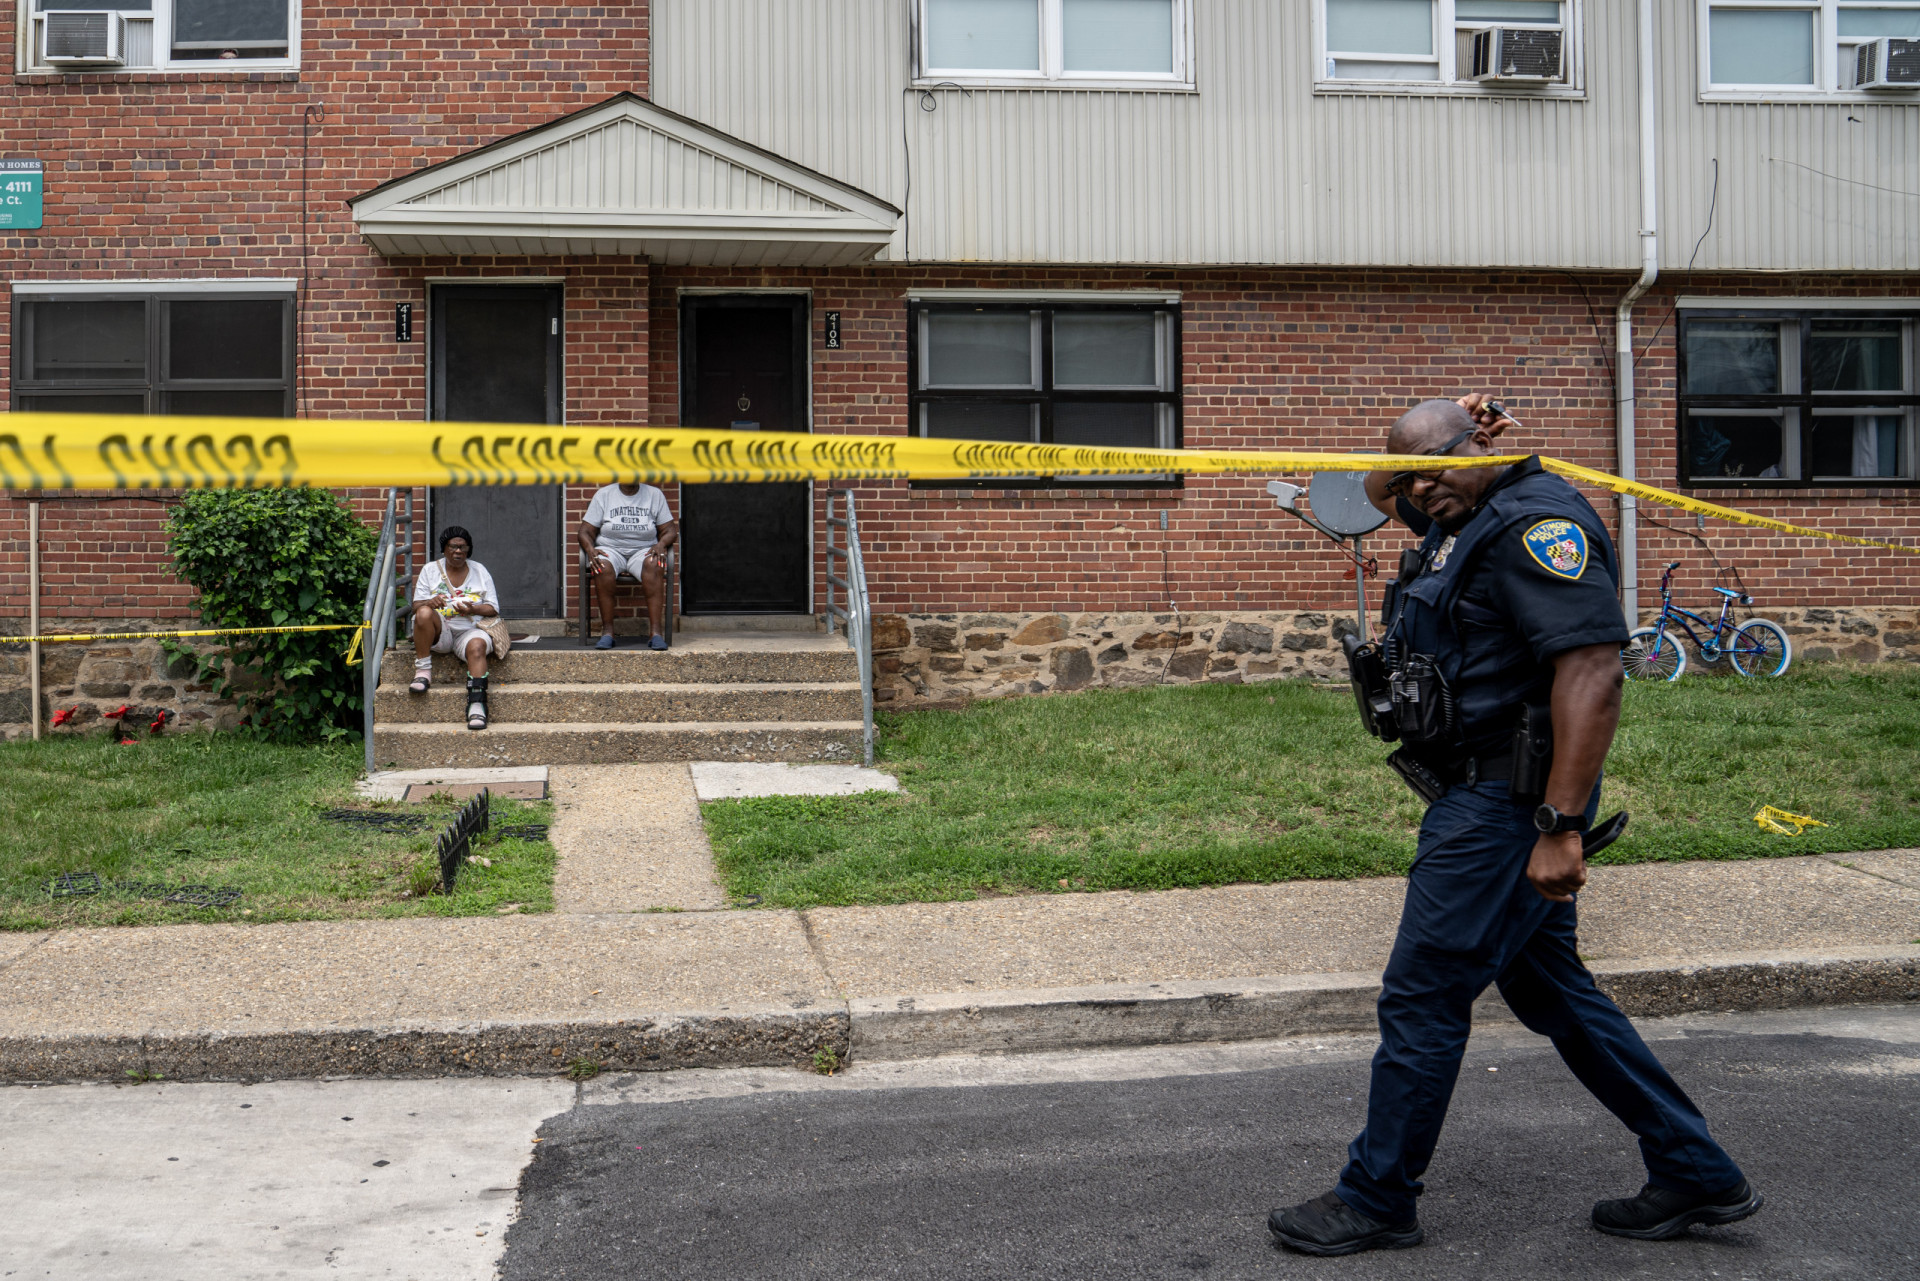 <p>Another historic American city, Baltimore, recording 57.76 homicides per 100,000 people, makes the list. Amid its vibrant neighborhoods, a challenging time lies ahead of the once great American city.</p><p>You may also like:<a href="https://www.starsinsider.com/n/434948?utm_source=msn.com&utm_medium=display&utm_campaign=referral_description&utm_content=578180en-en"> Discover 60 extreme points of Earth</a></p>